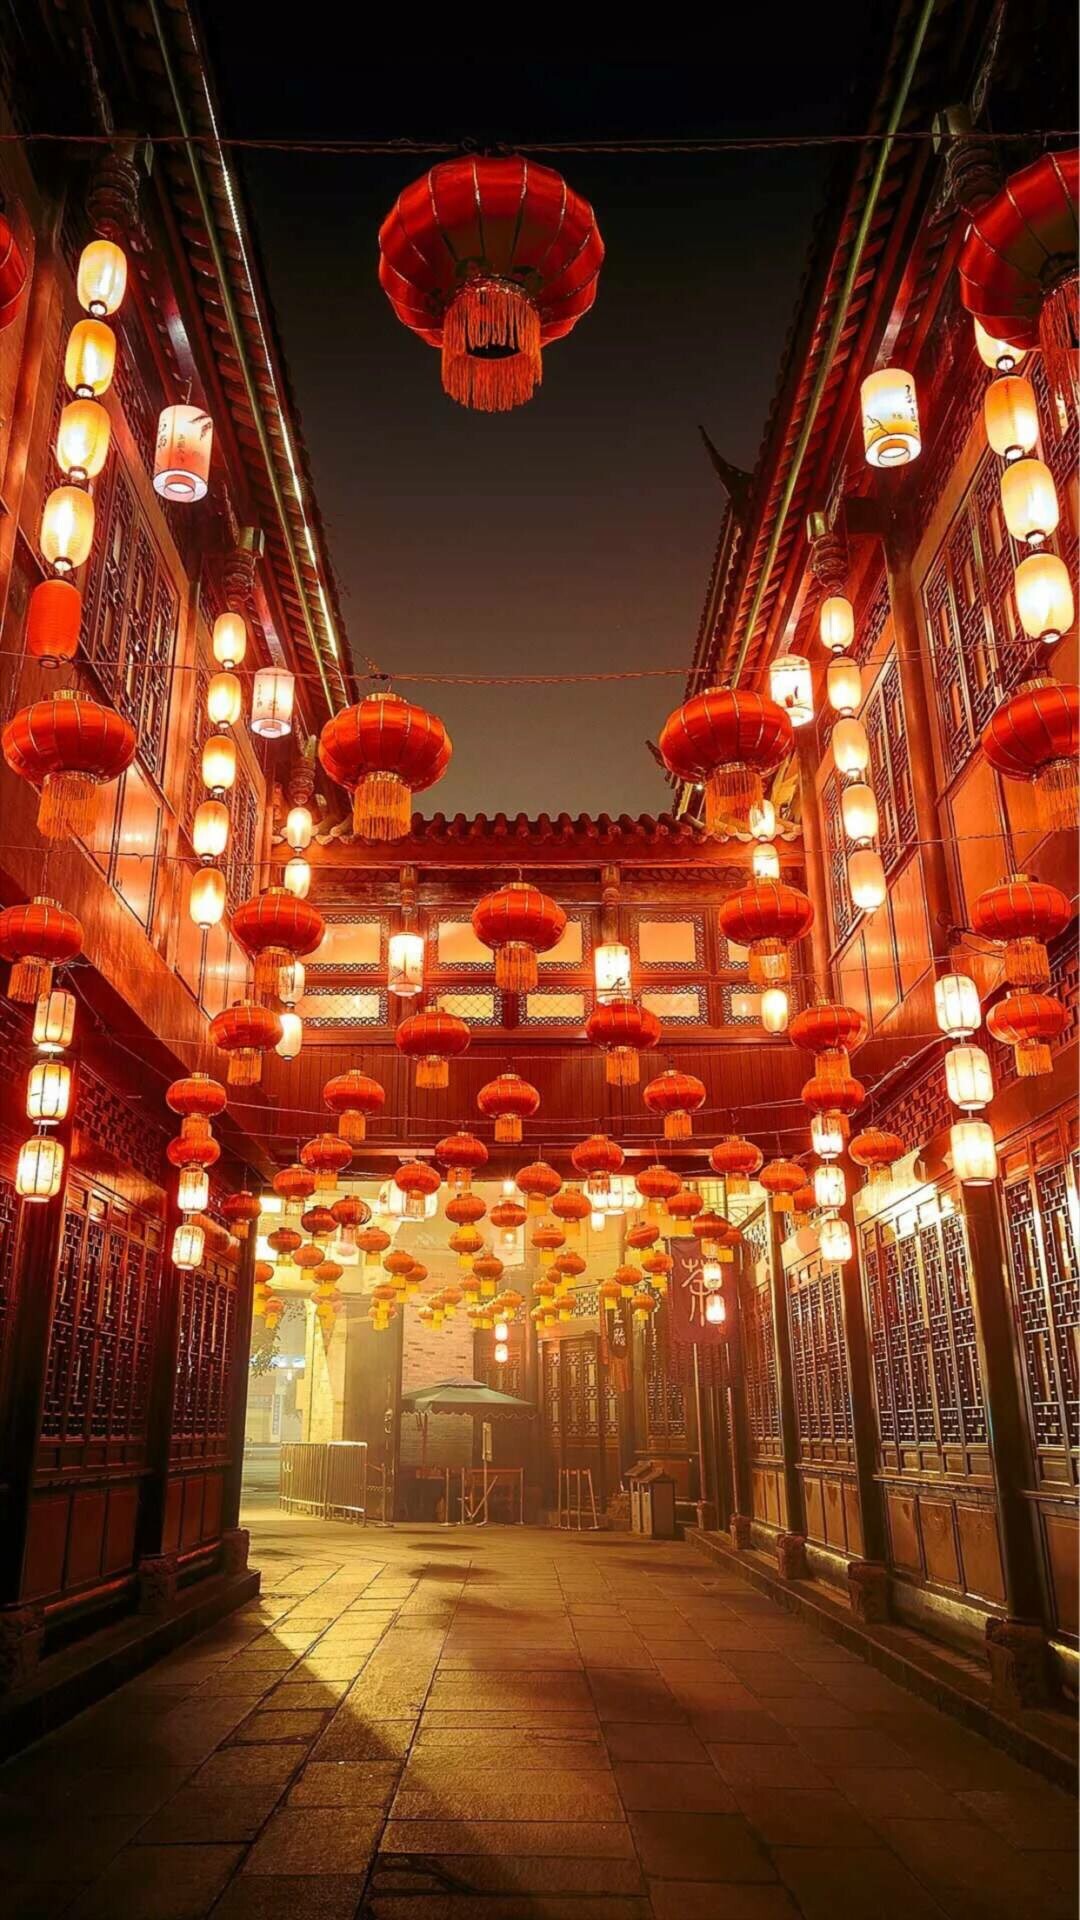 China: Chinese red paper lanterns, Symbols of wealth, fame, and prosperity. 1080x1920 Full HD Wallpaper.